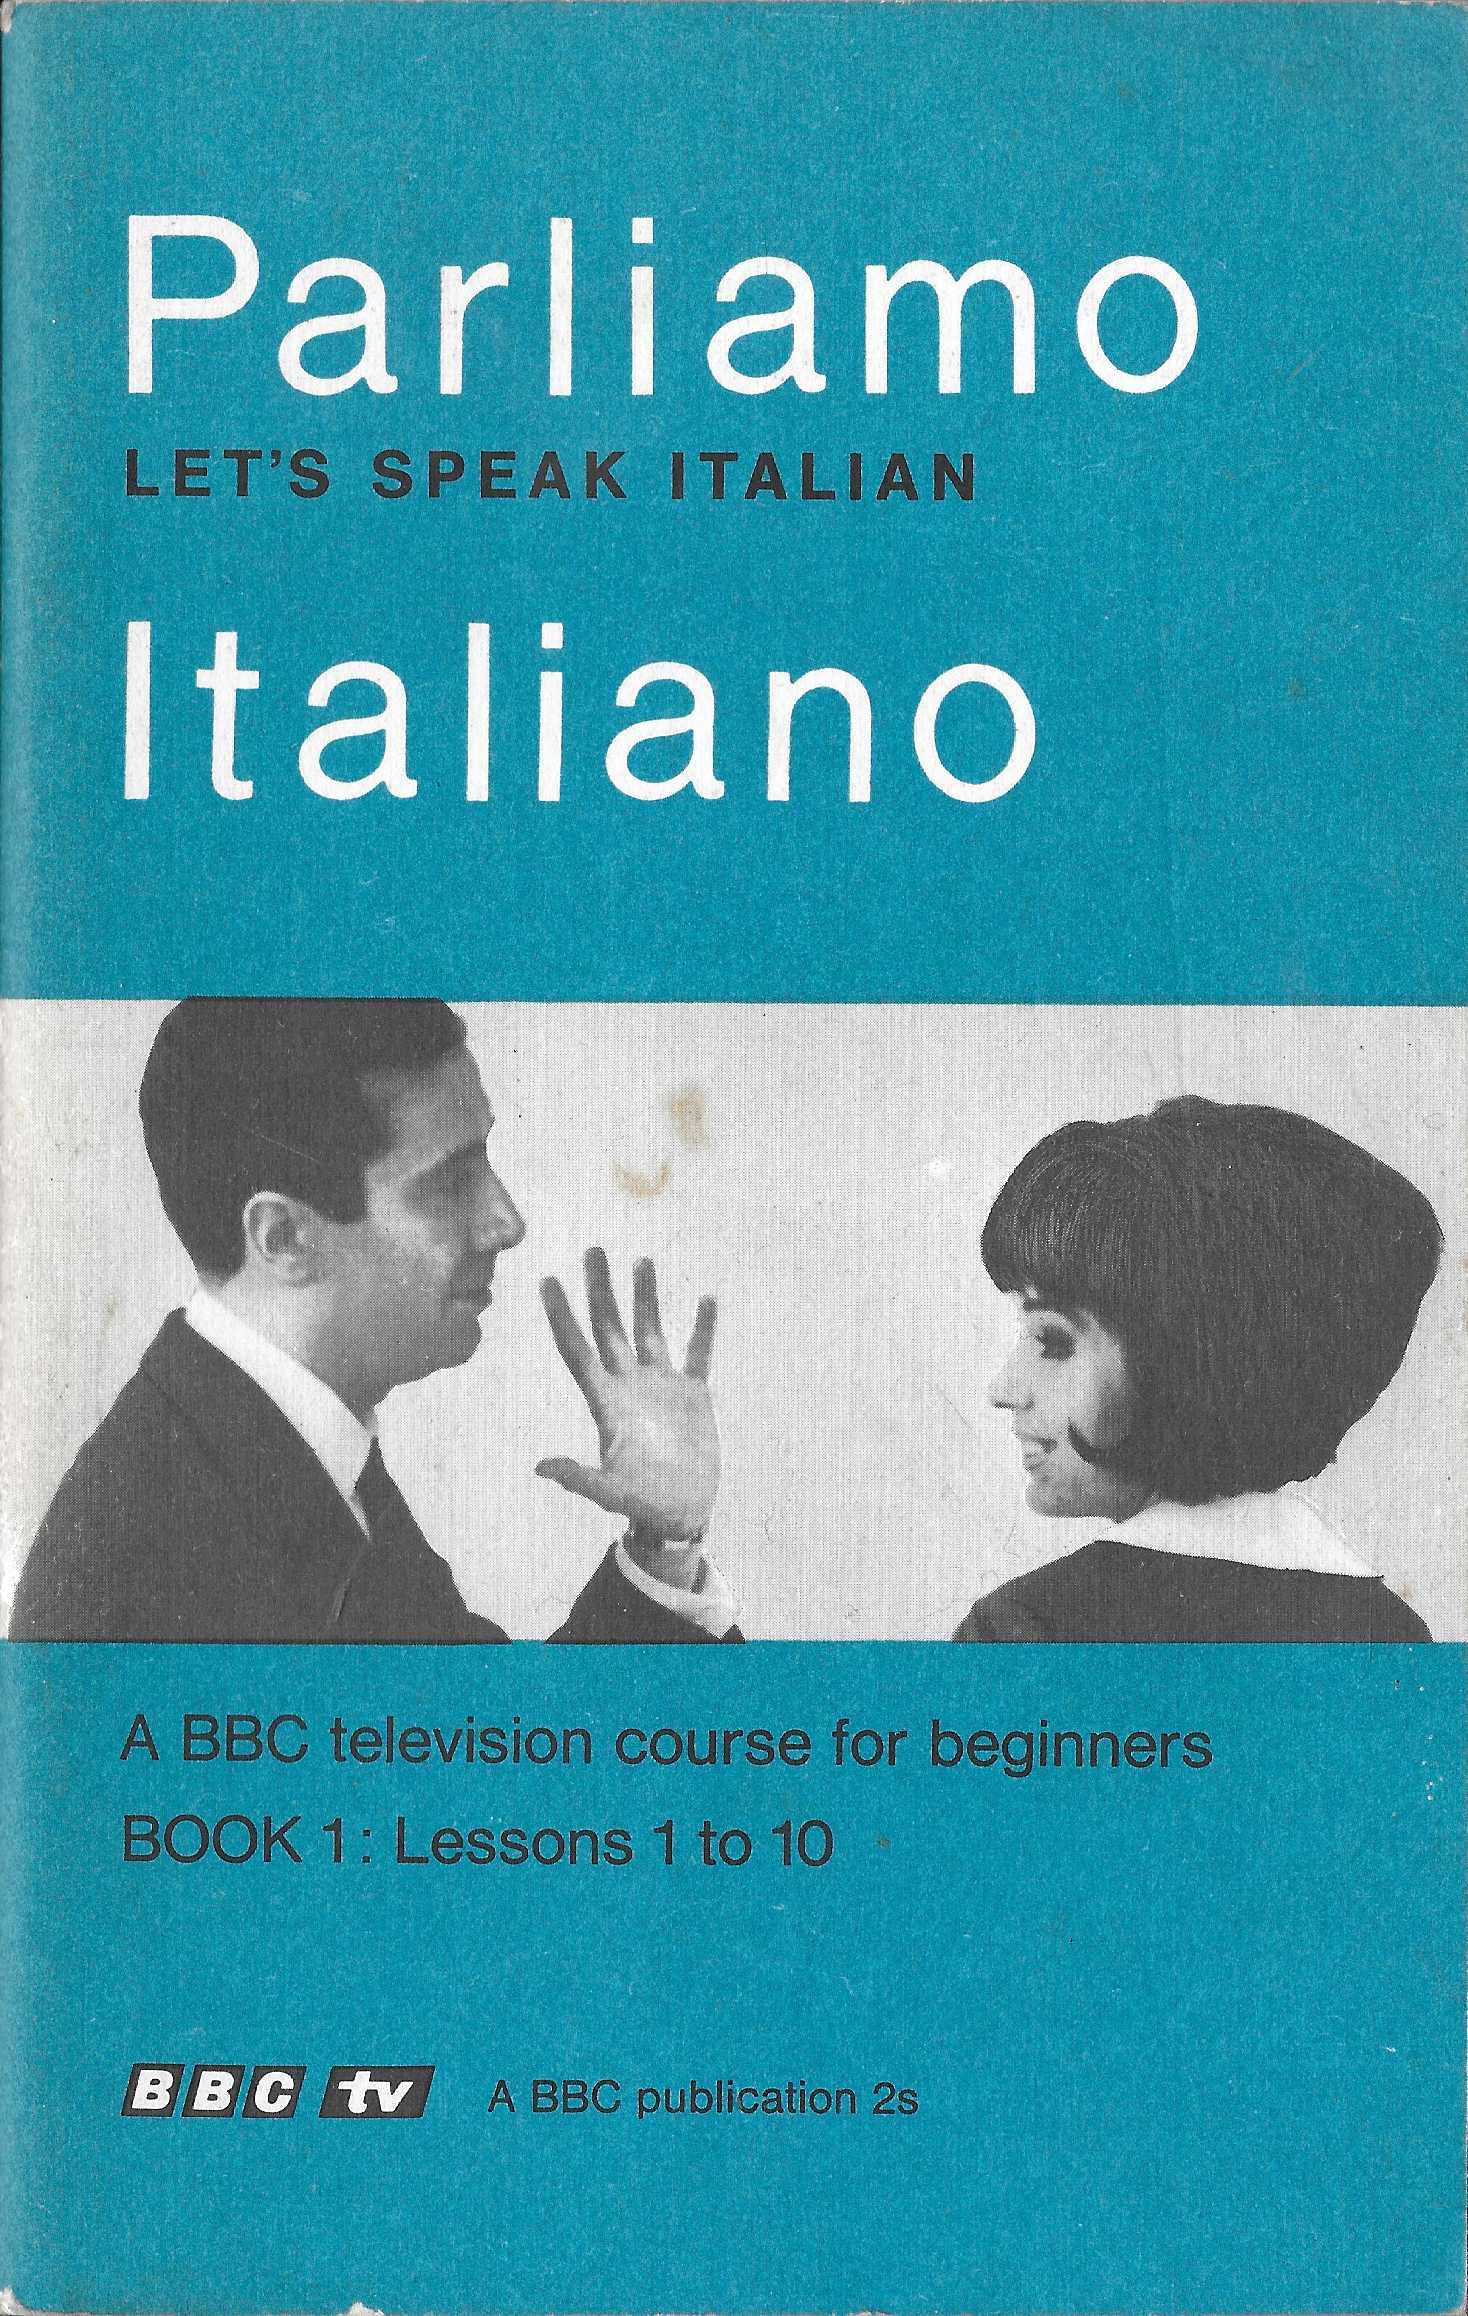 Picture of books-OP 1 Parliamo Italiano - Let's Speak Italian lessons 1 - 10 by artist Toni Cerutti from the BBC books - Records and Tapes library